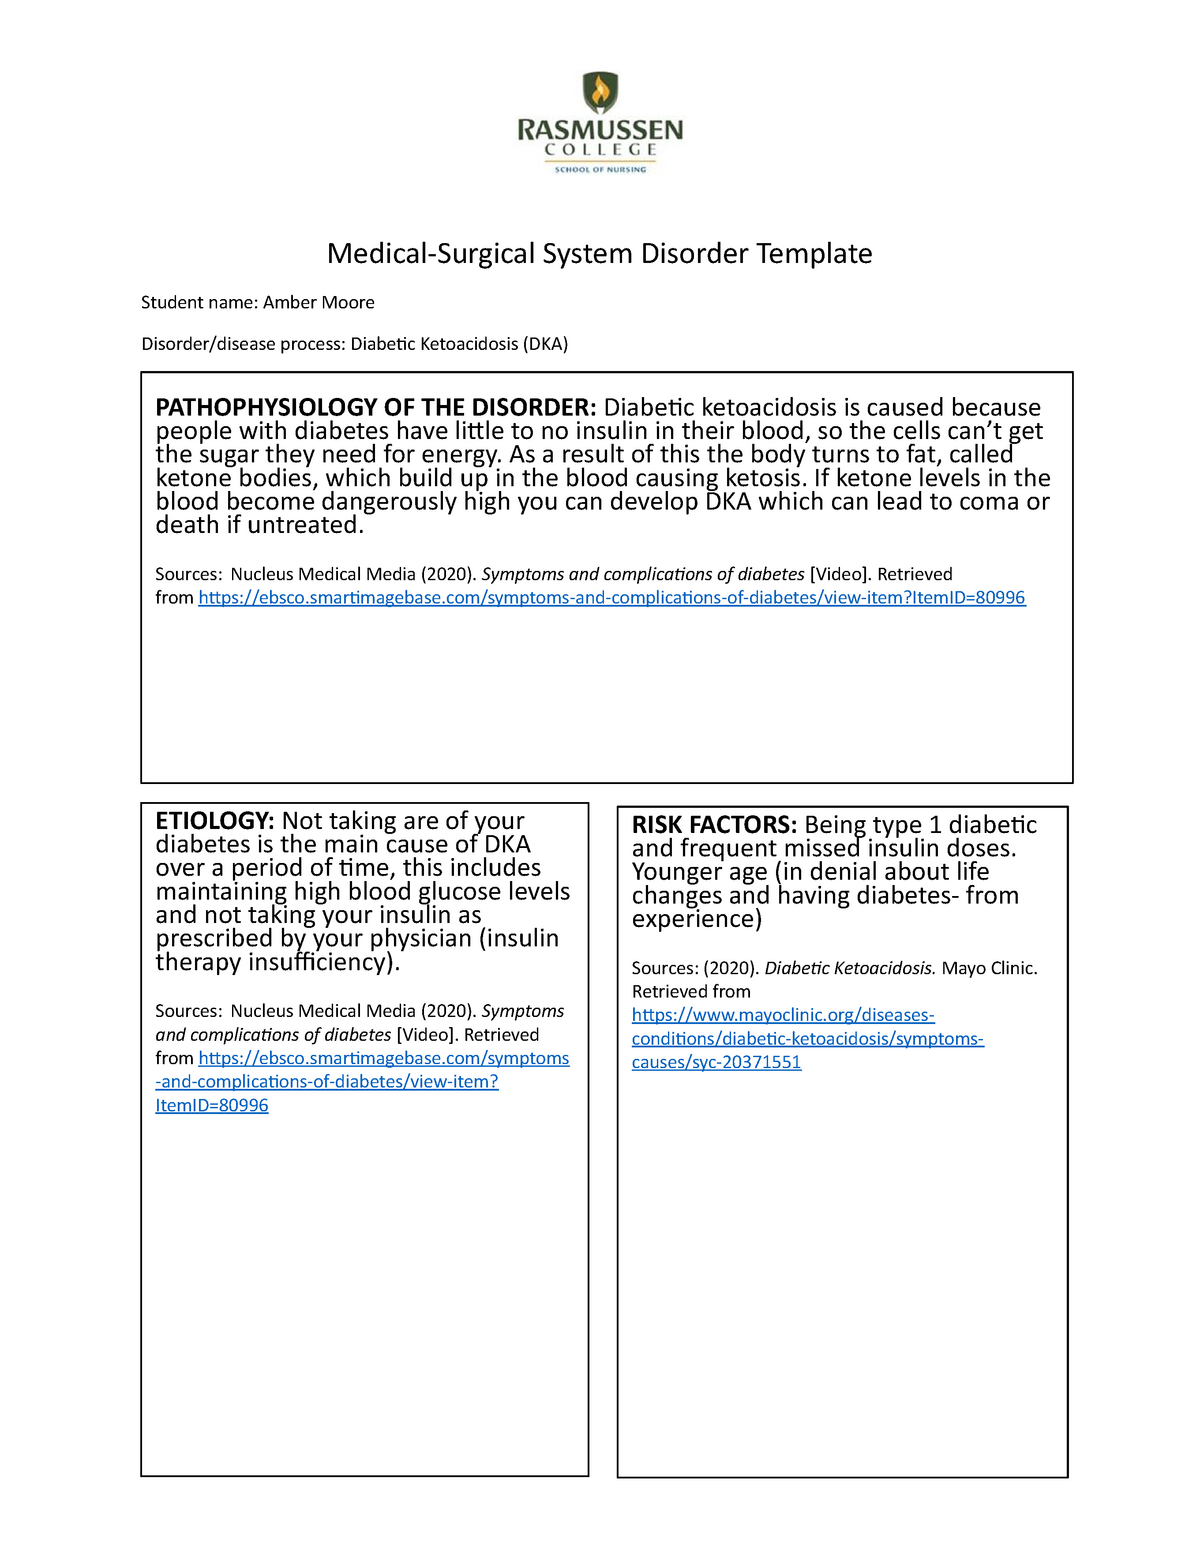 Diabetic Ketoacidosis EC Template Medical Surgical System Disorder Template Student Name